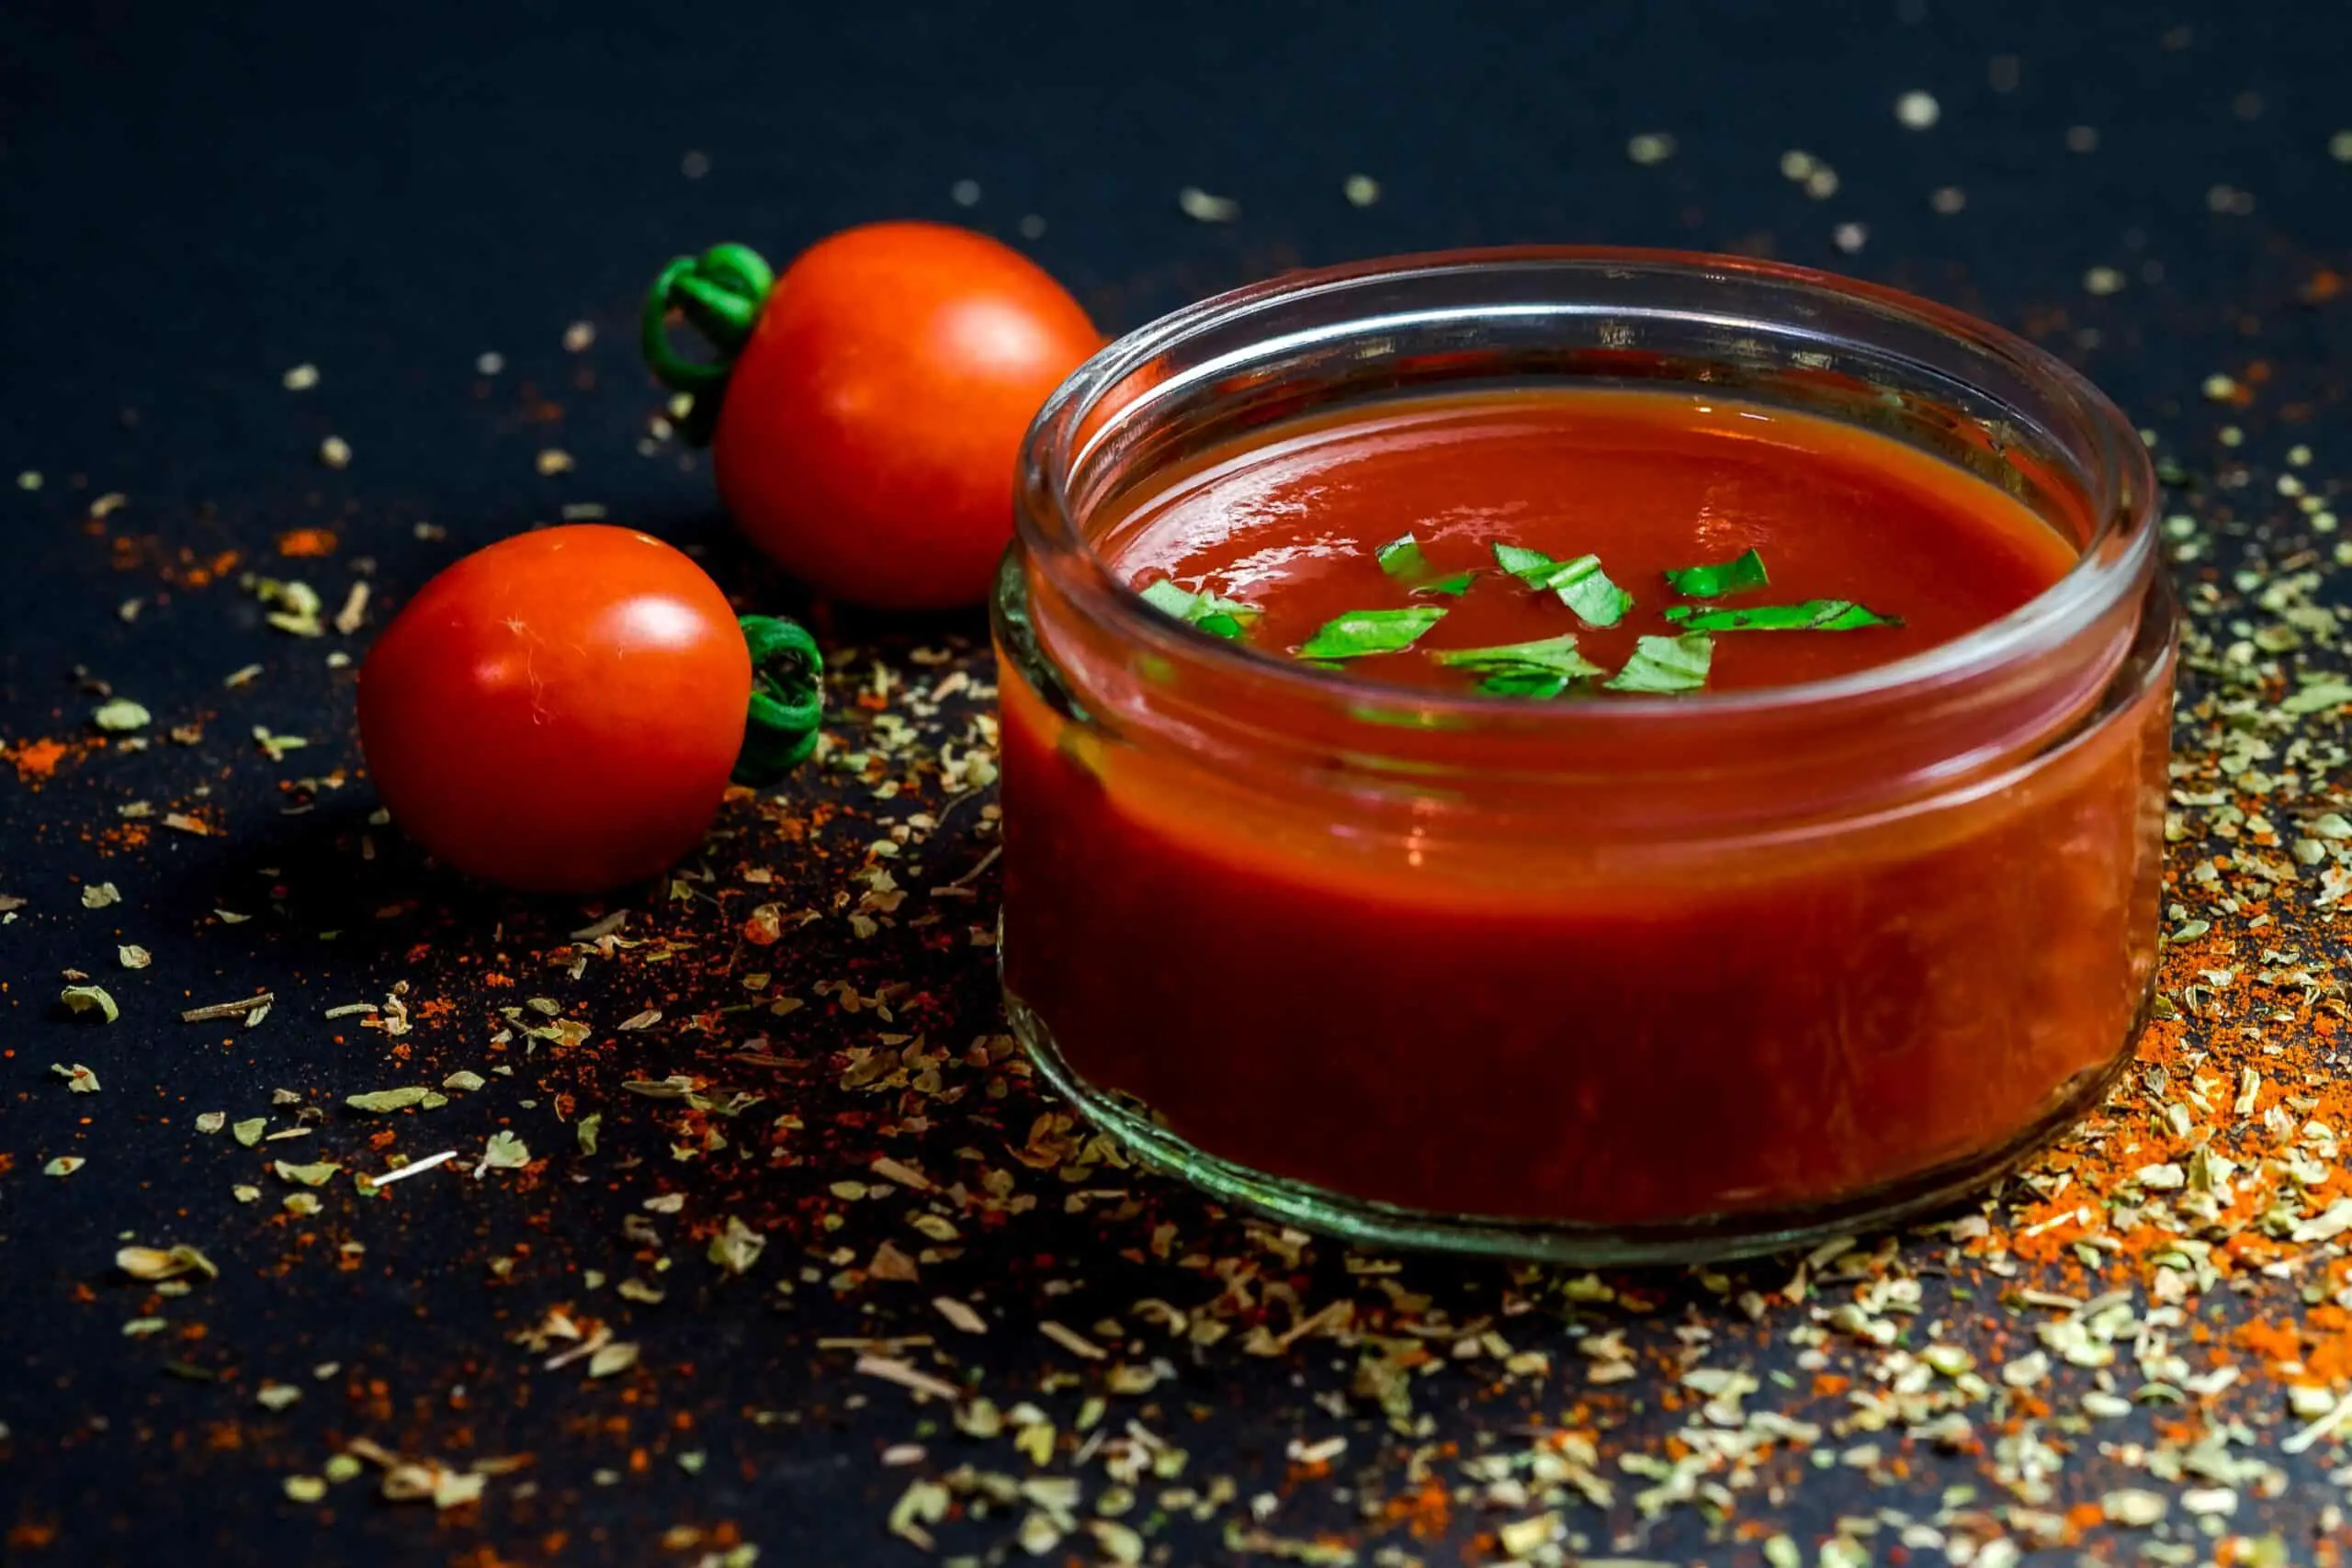 Top Tips For Creating Your Own Condiments At Home